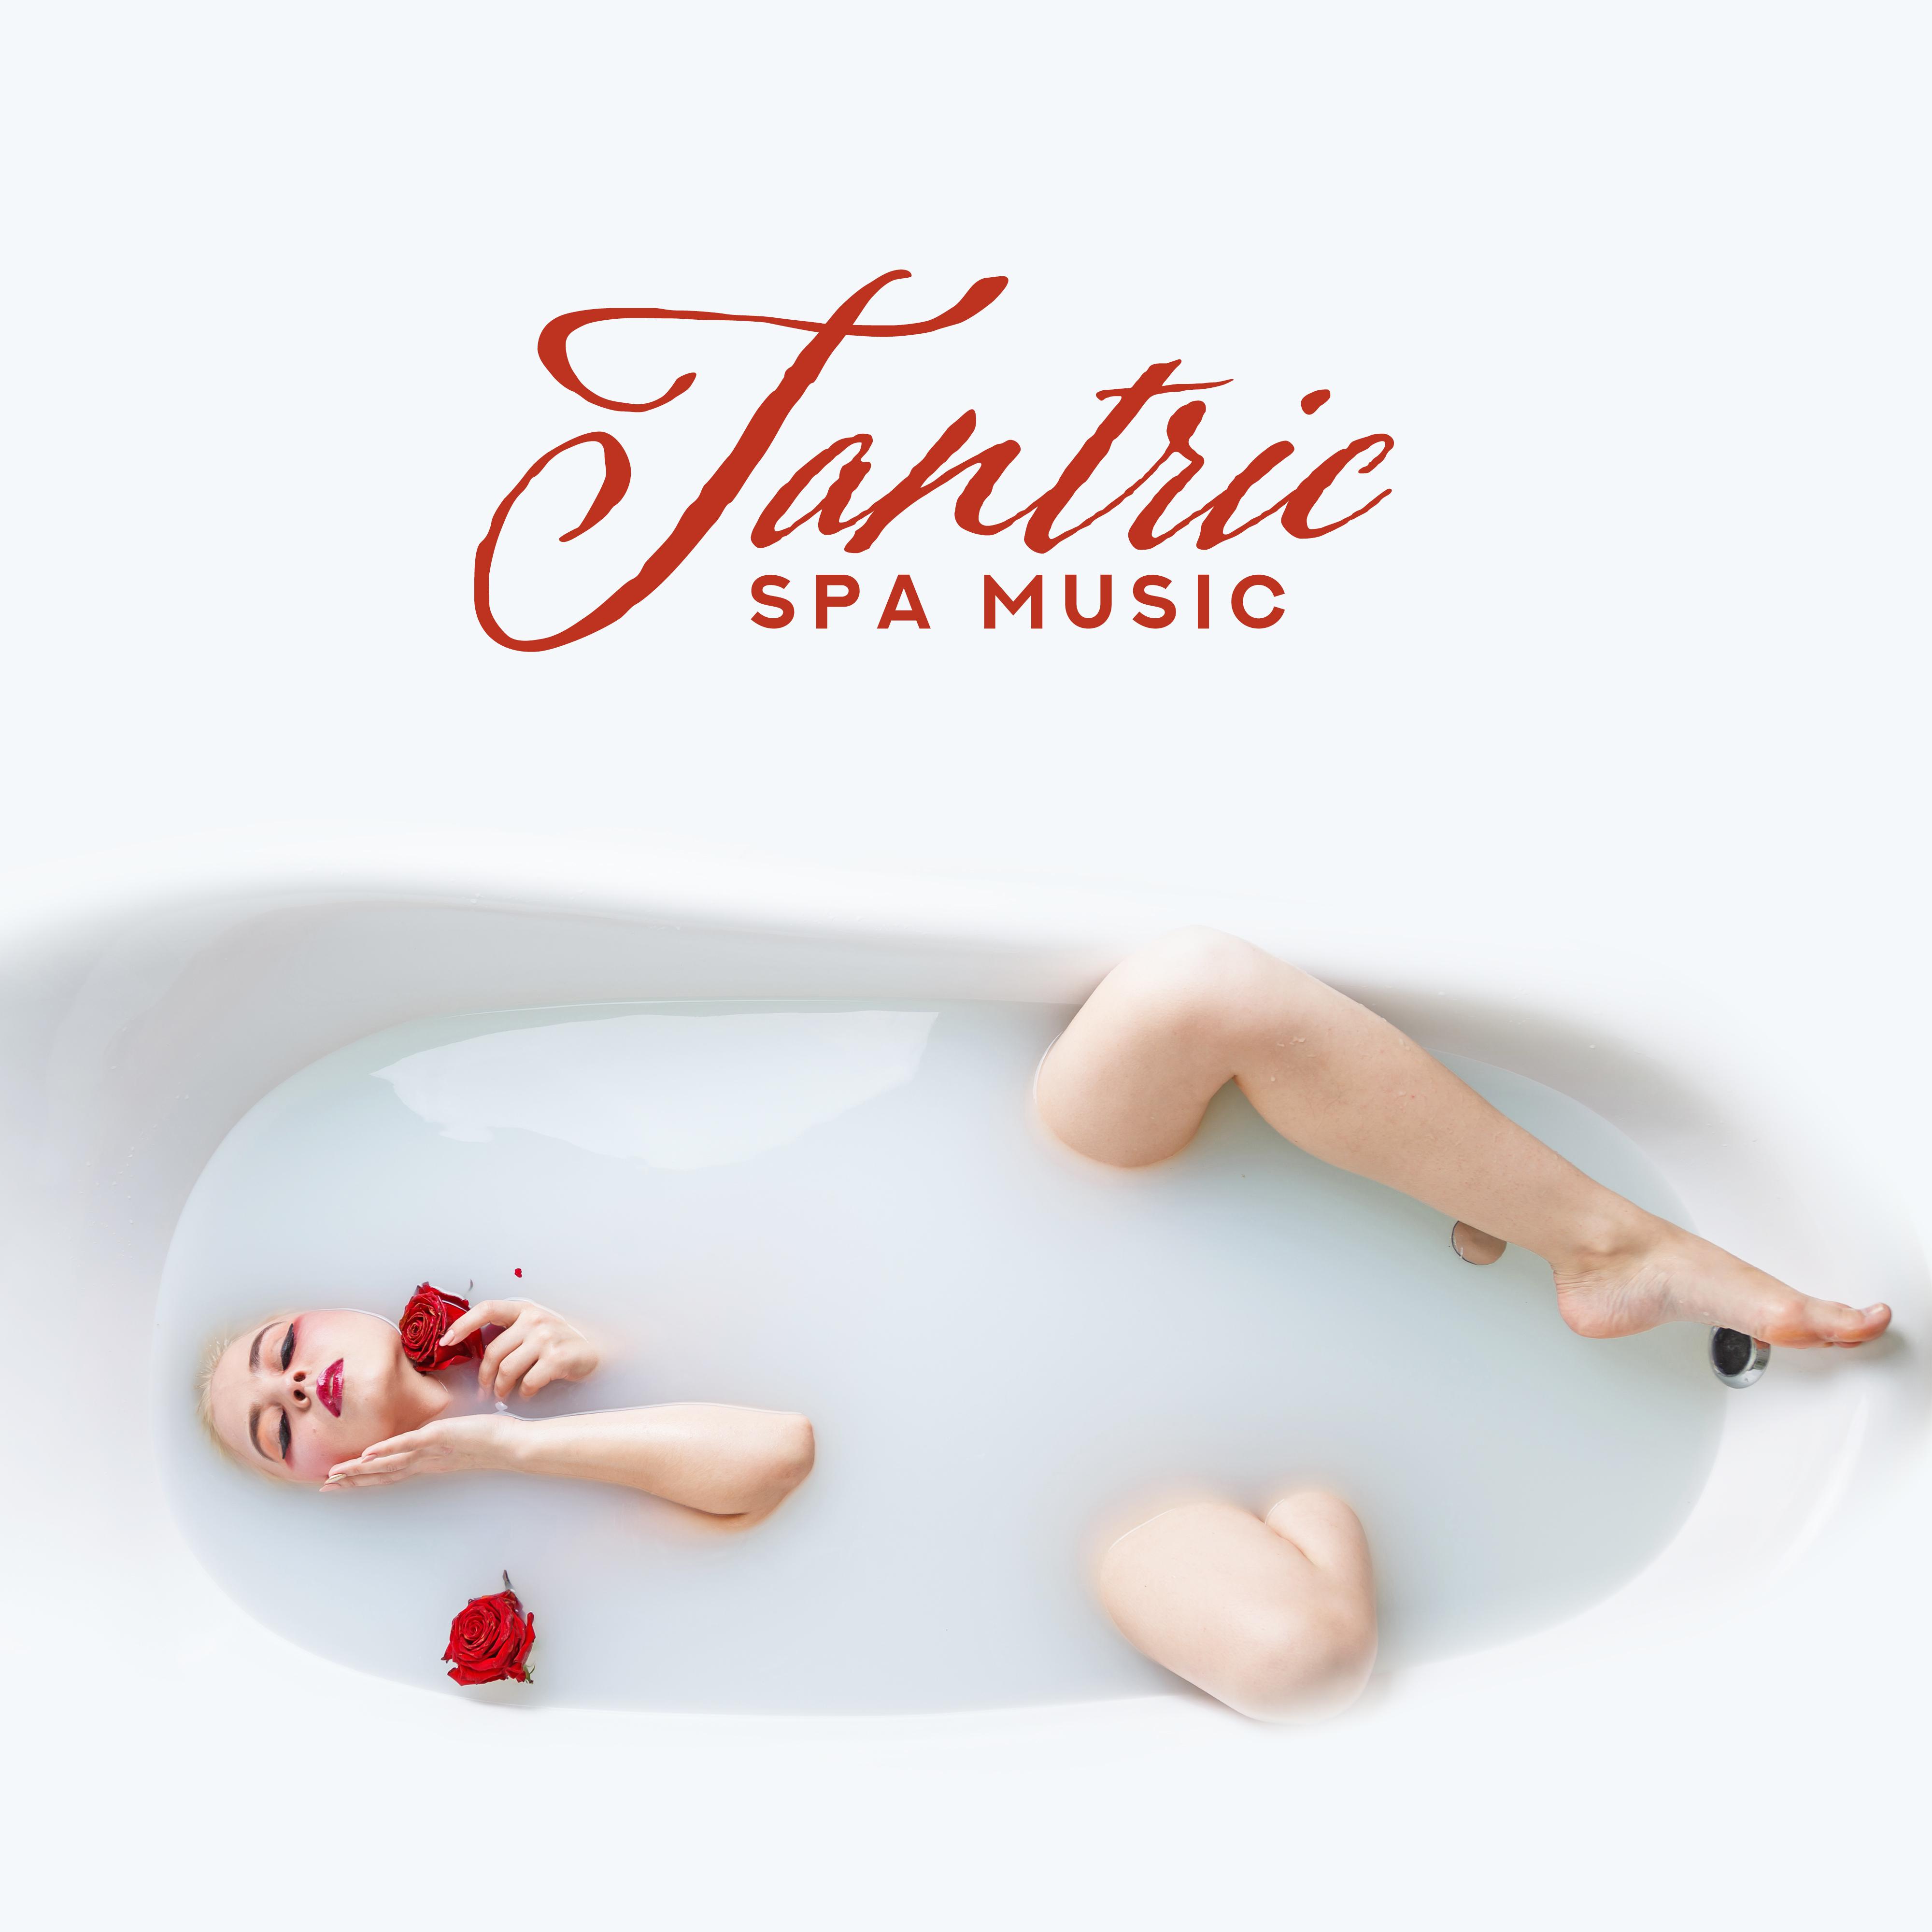 Tantric Spa Music: for Erotic Massage, Relaxation Treatments, Therapy, Detoxification of the Body and Mind